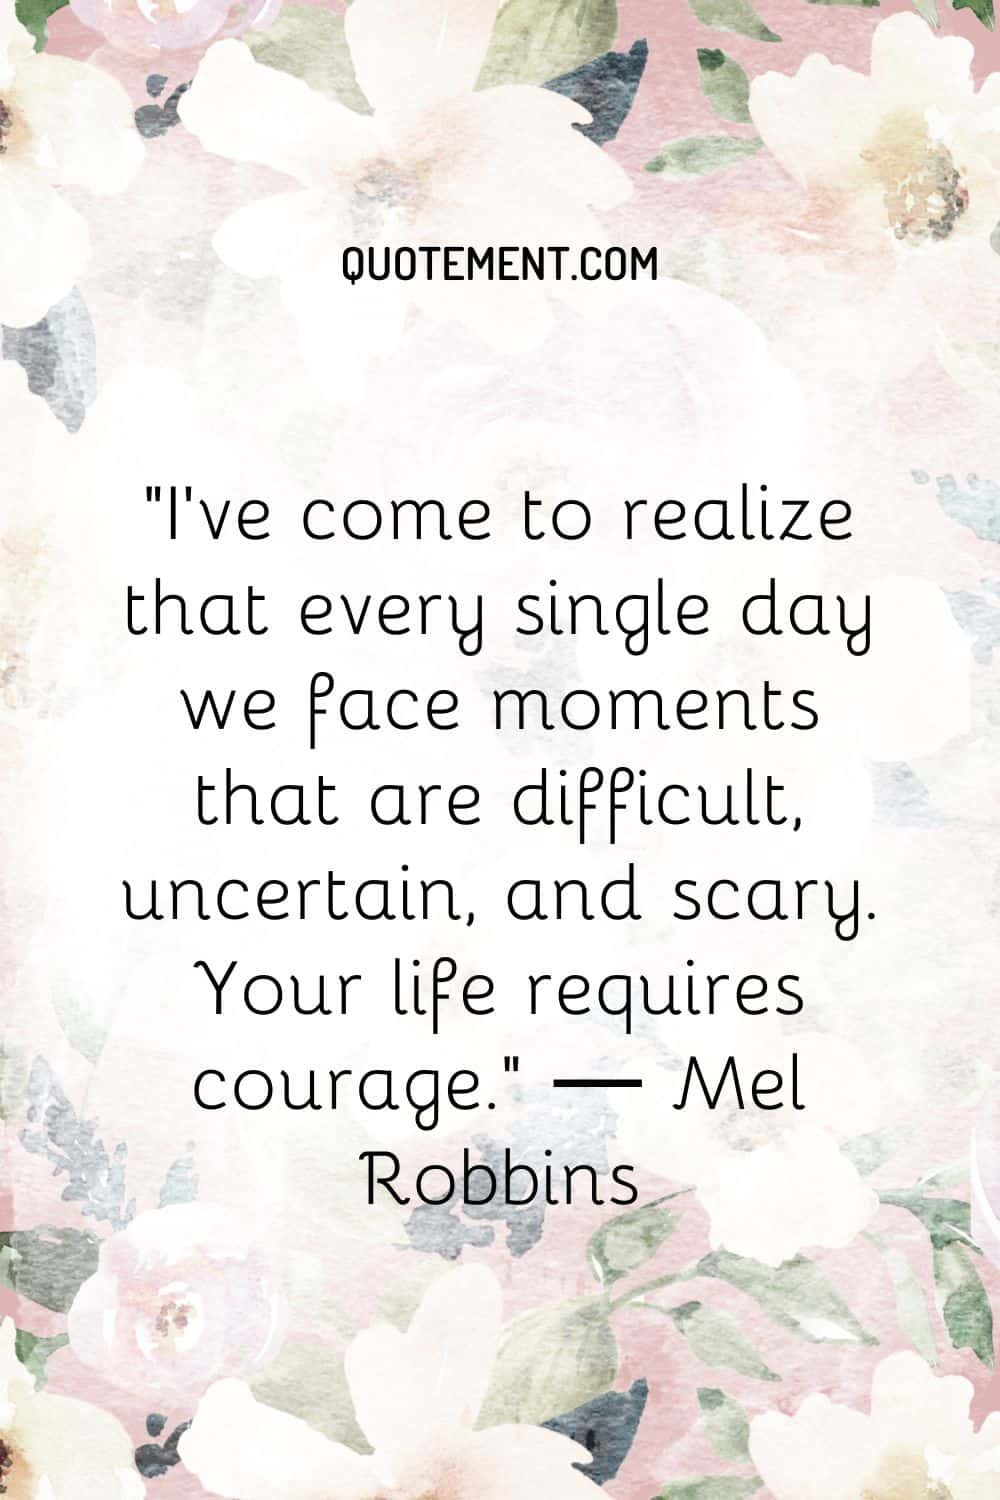 I’ve come to realize that every single day we face moments that are difficult, uncertain, and scary. Your life requires courage